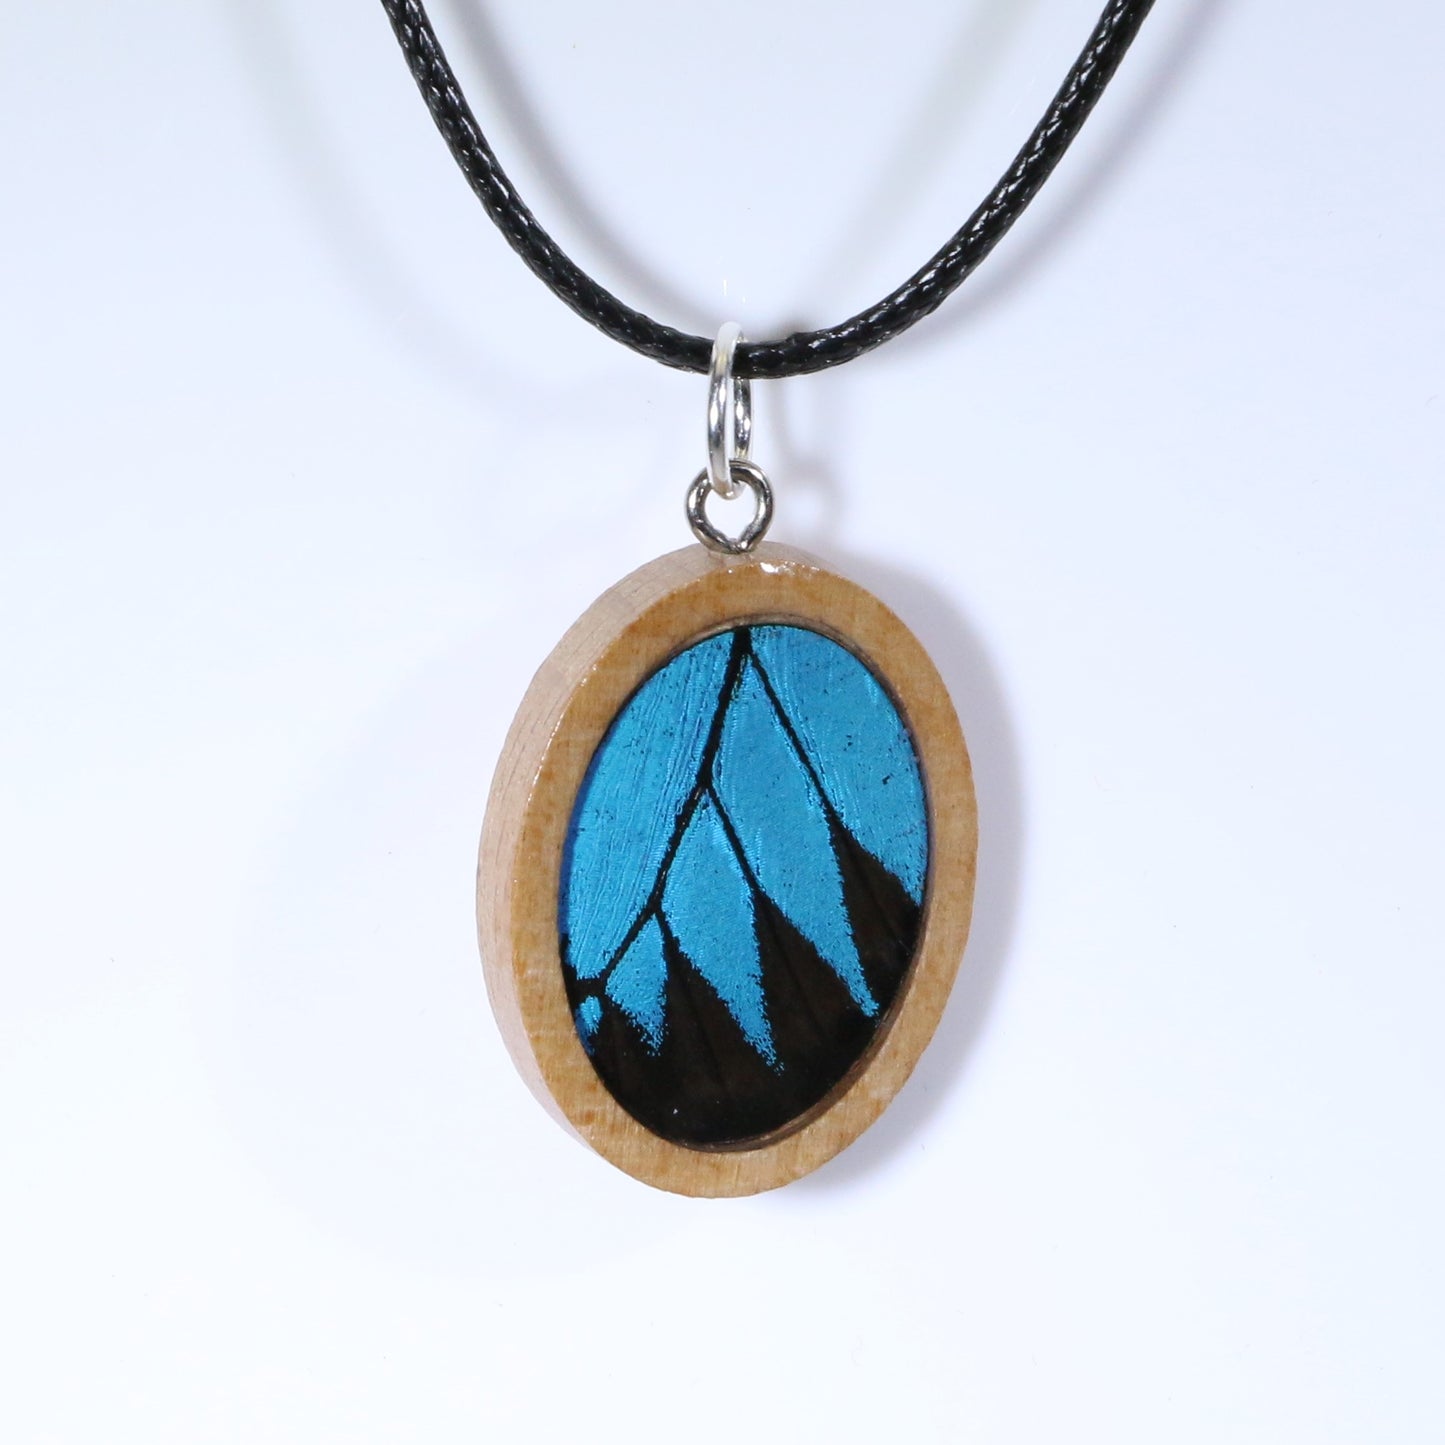 52607 - Real Butterfly Wing Jewelry - Pendant - Tan Wood - Oval - Blue Mountain Swallowtail